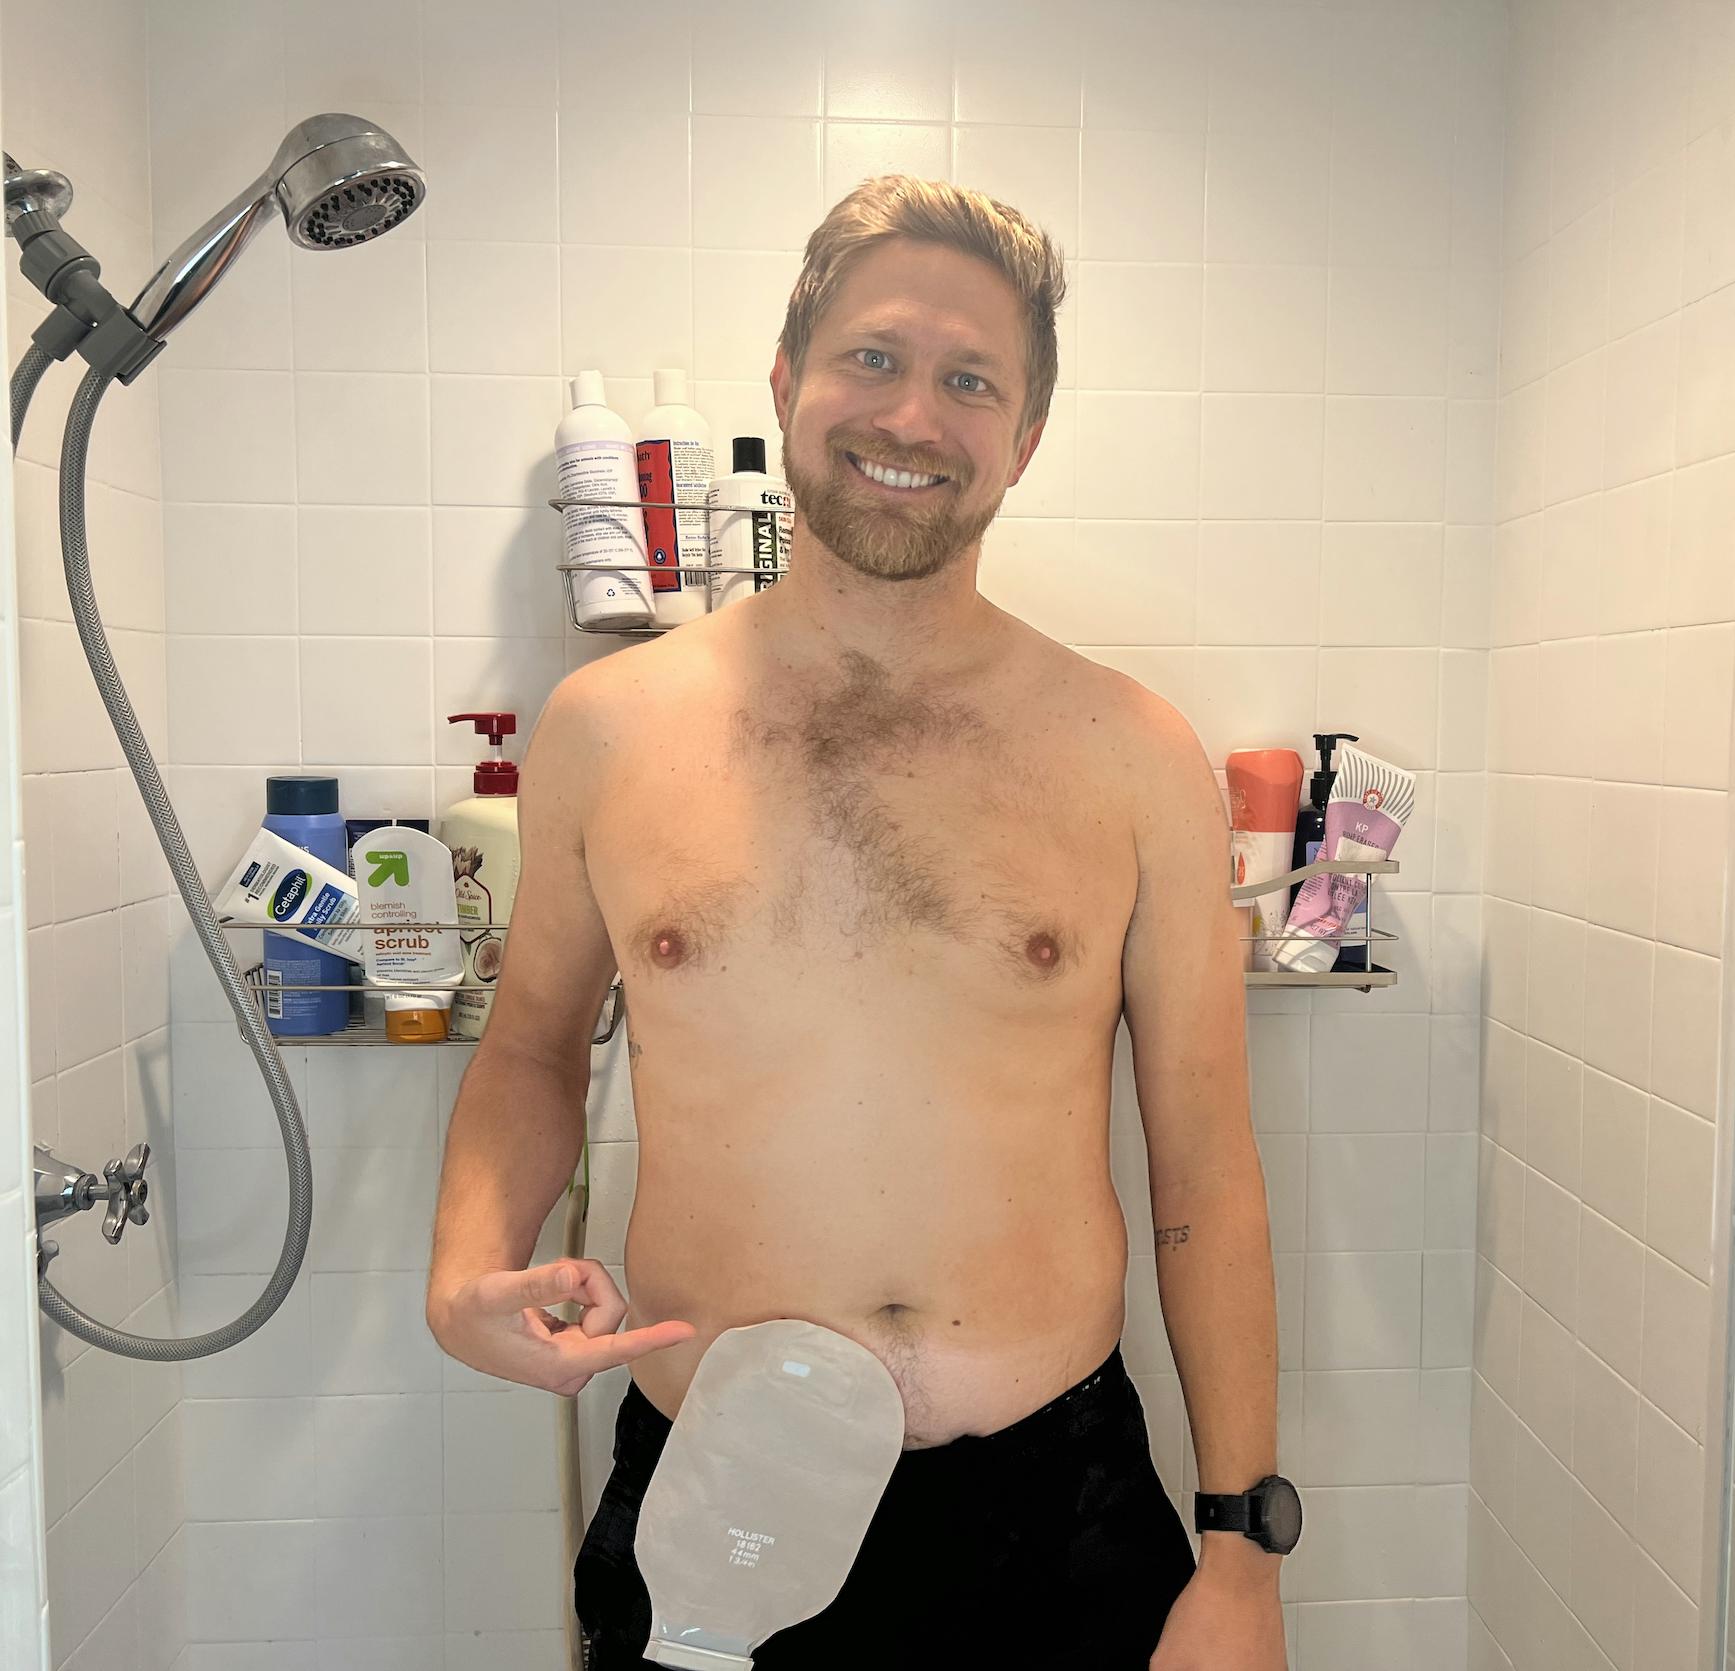 Things You Should Know About Showering With an Ostomy